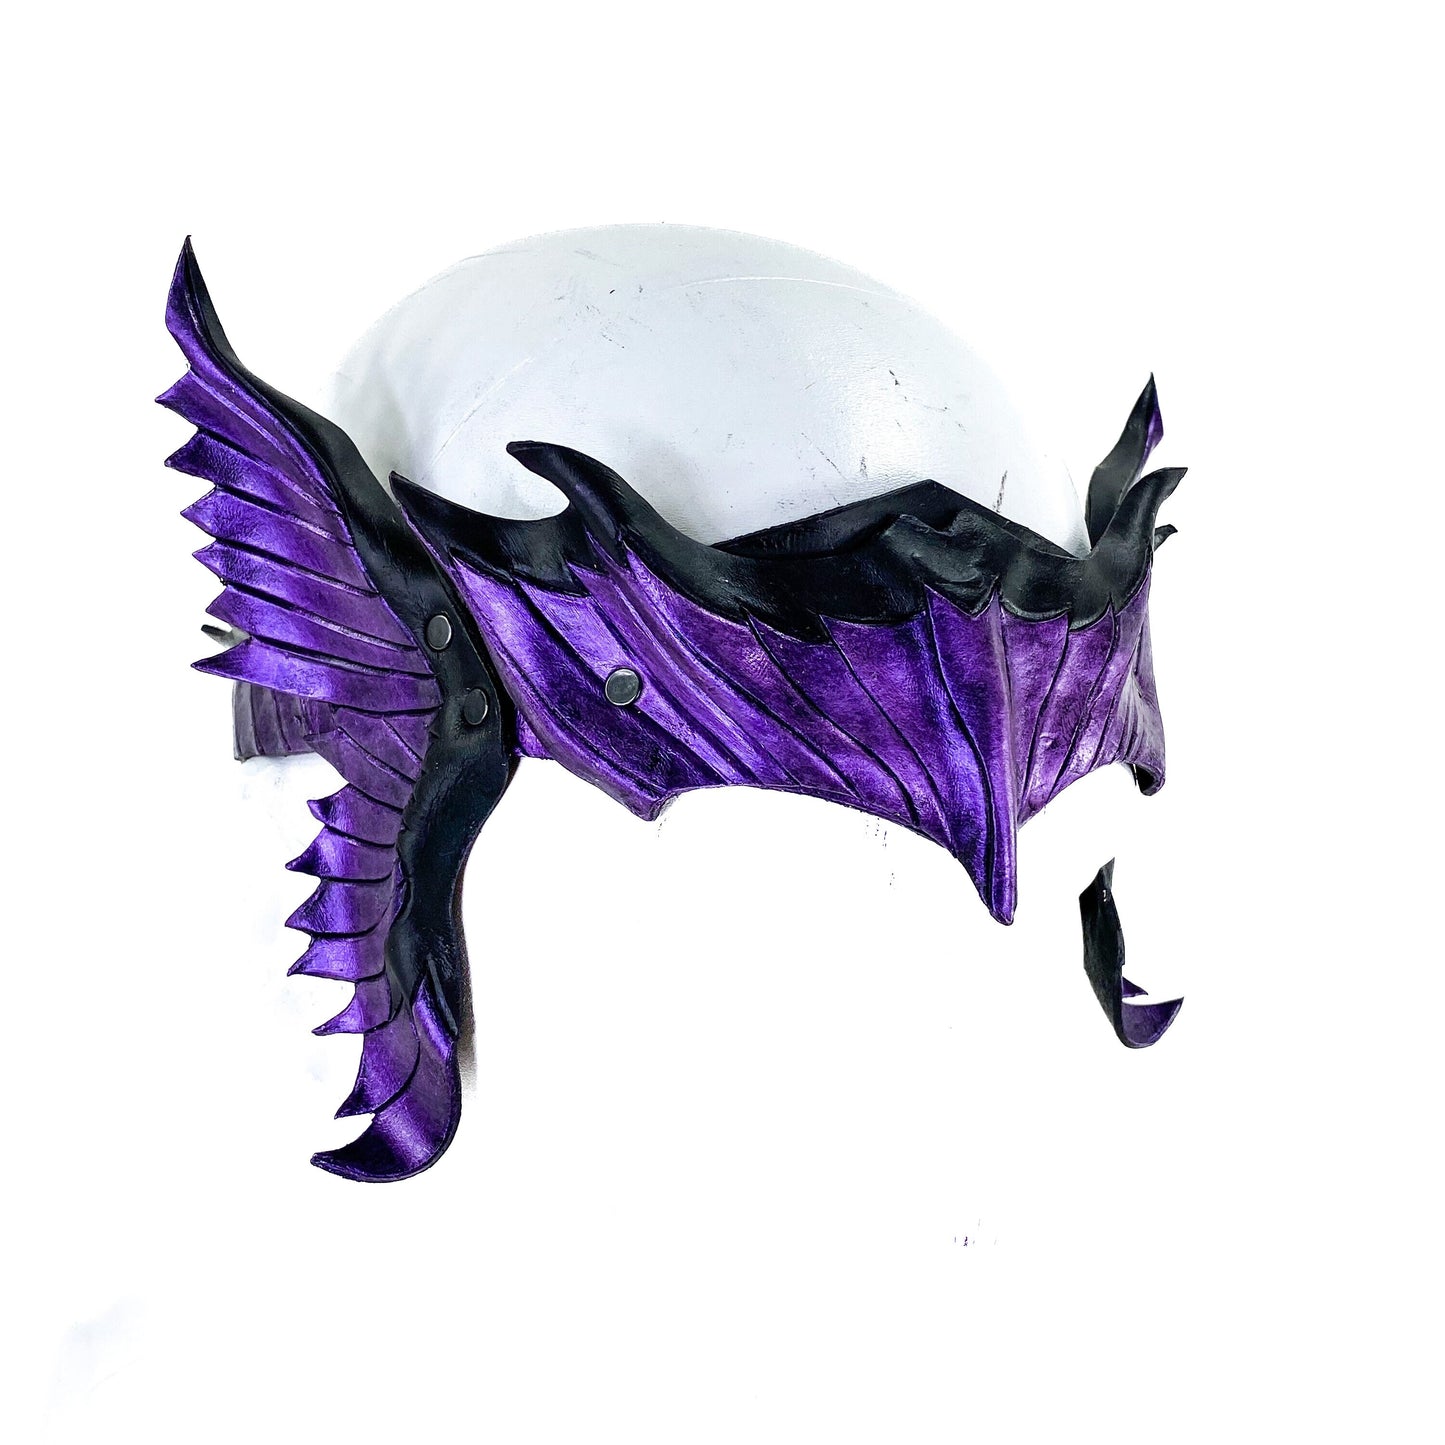 Masquerade Crown of Handmade Genuine Leather in  Purple and Black